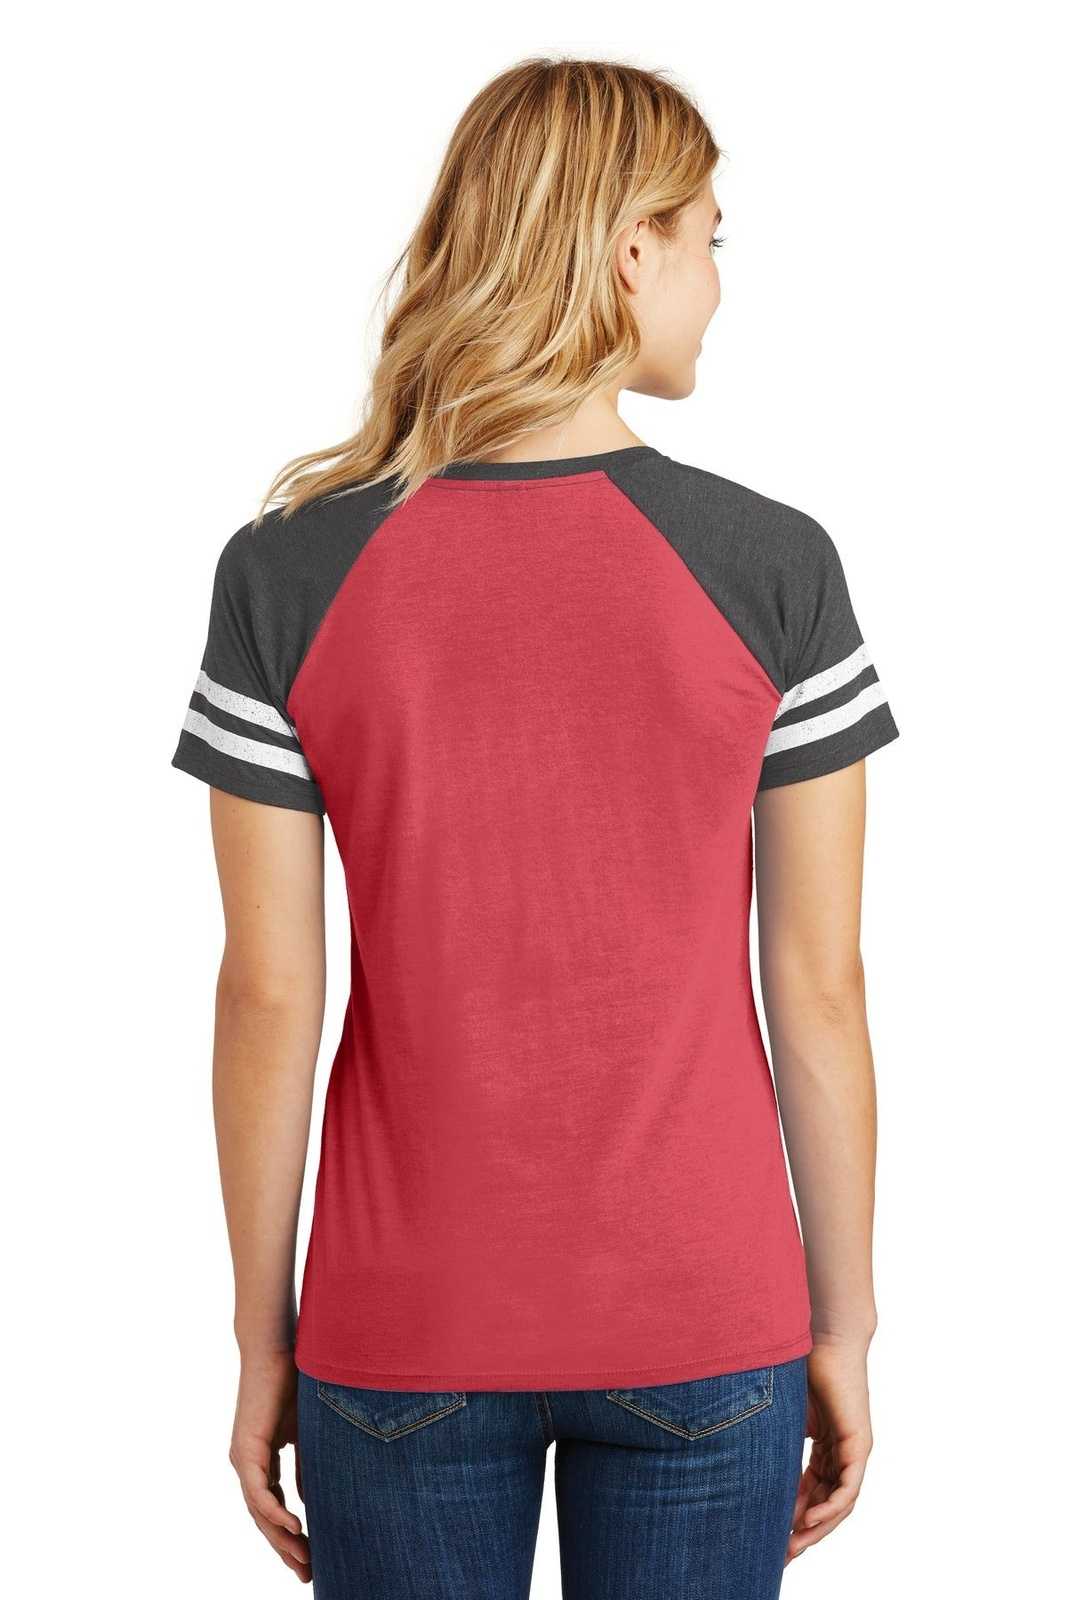 District DM476 Women's Game V-Neck Tee - Heathered Red Heathered Charcoal - HIT a Double - 1